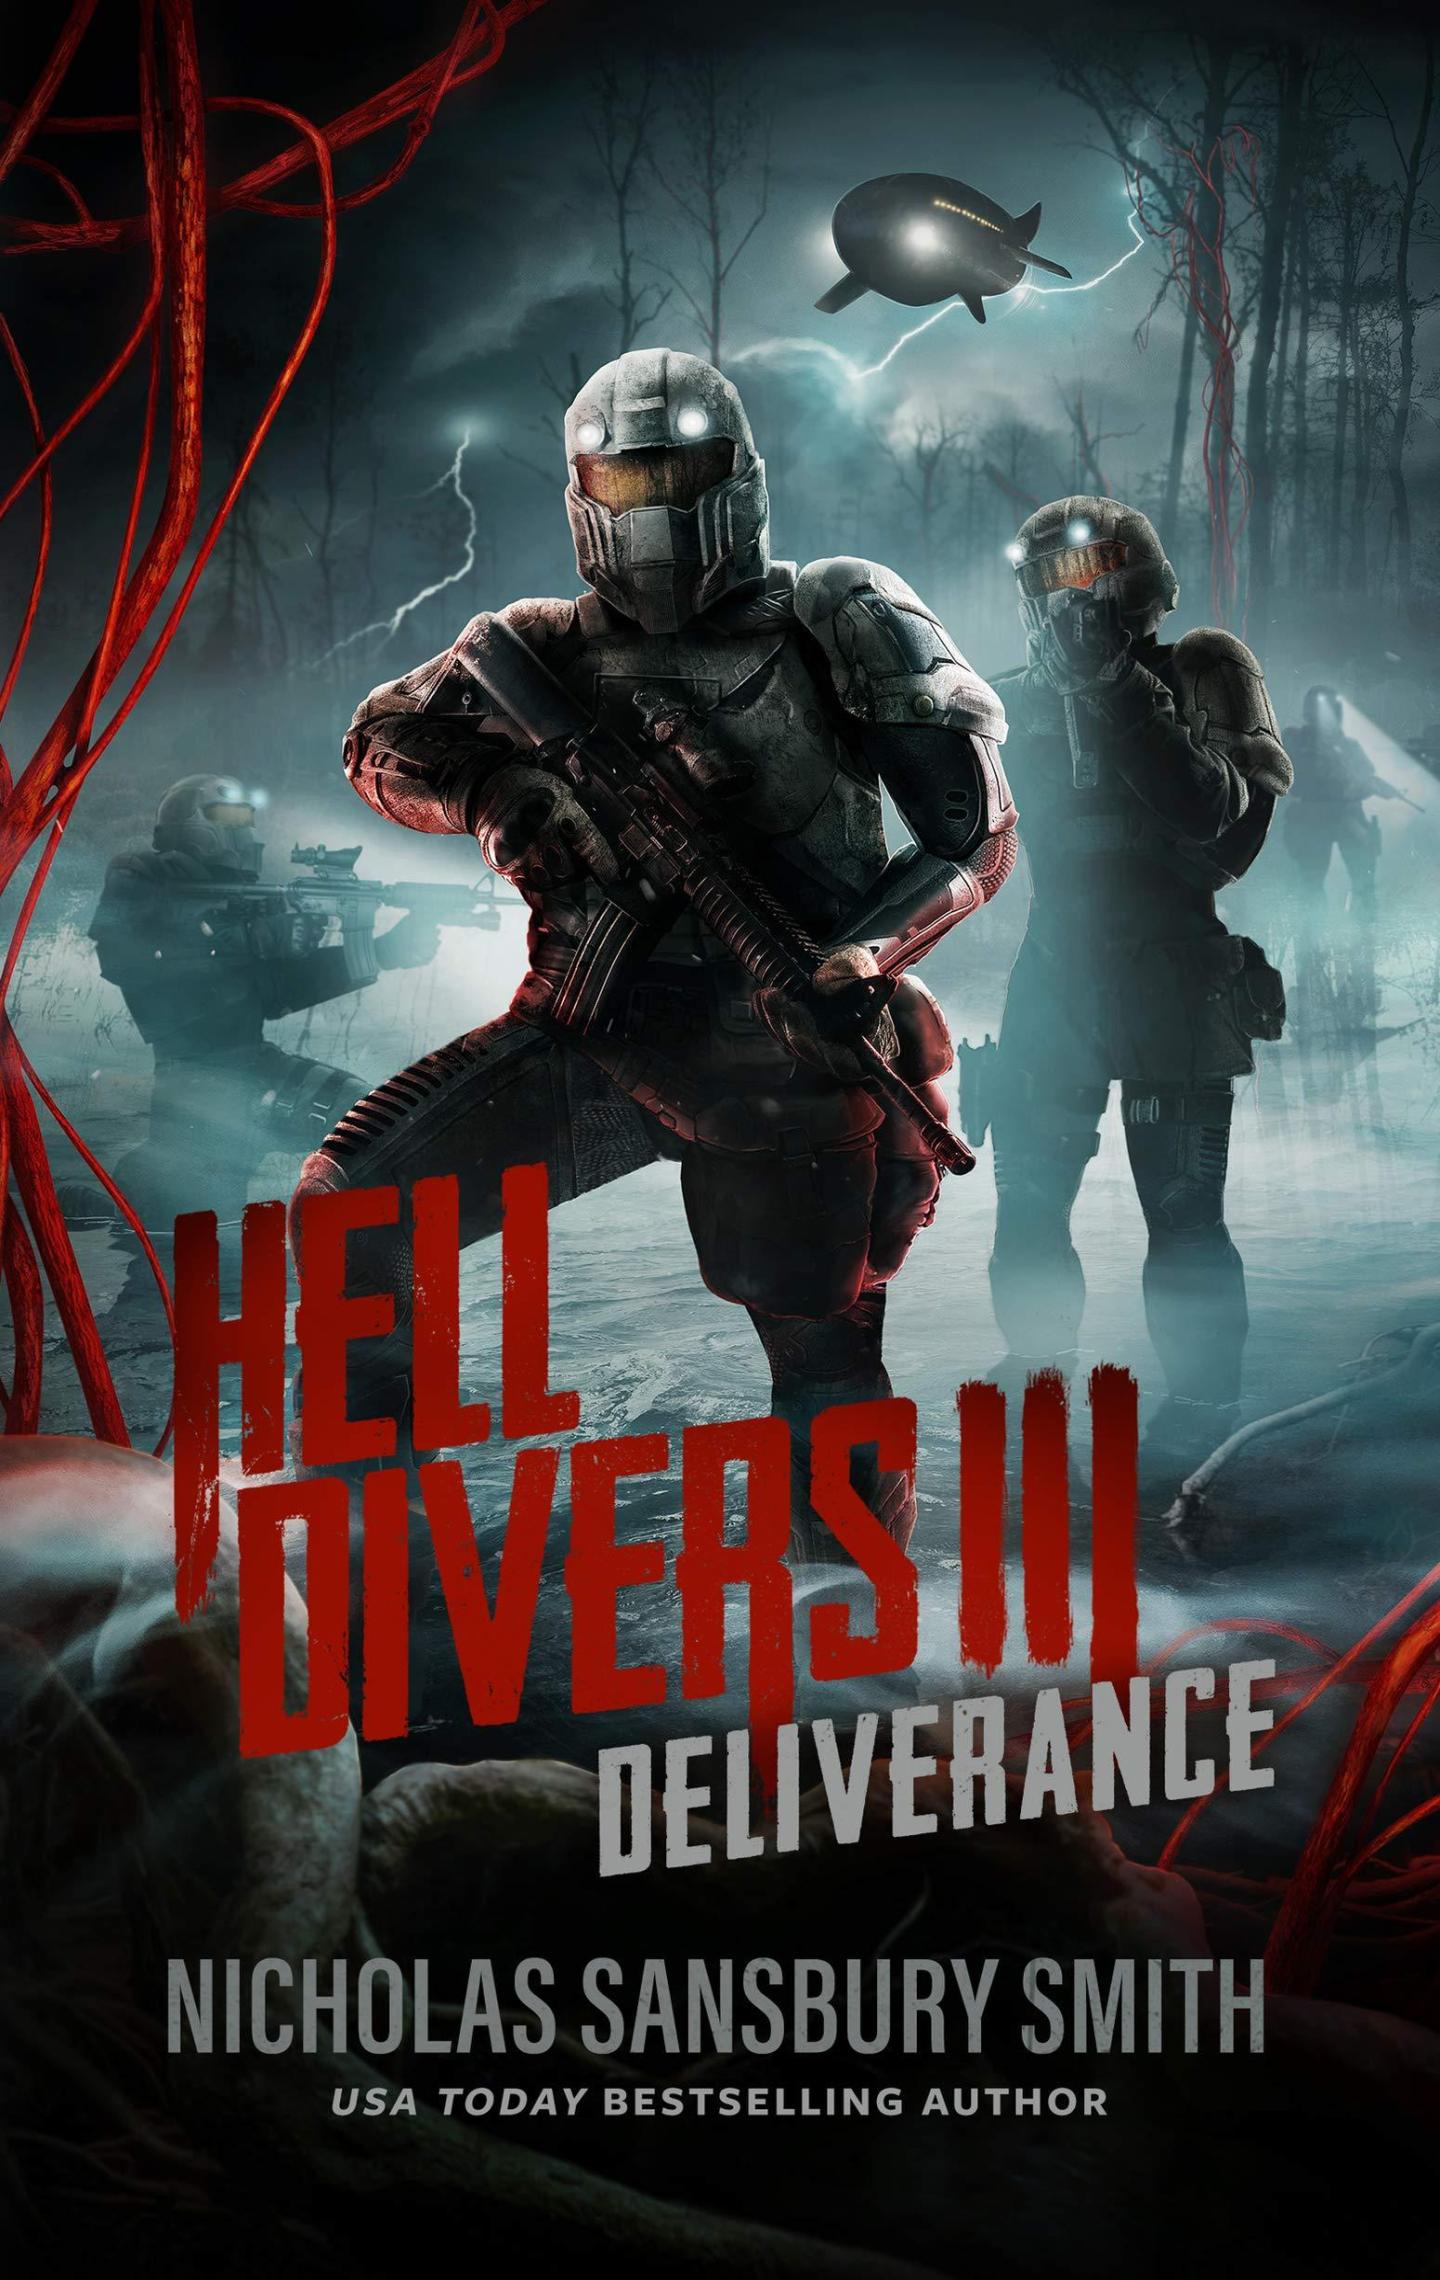  Hell Divers VI: Allegiance (Hell Divers Series, Book 6) (The  Hell Divers Series, 6): 9781538553510: Nicholas Sansbury Smith: Books